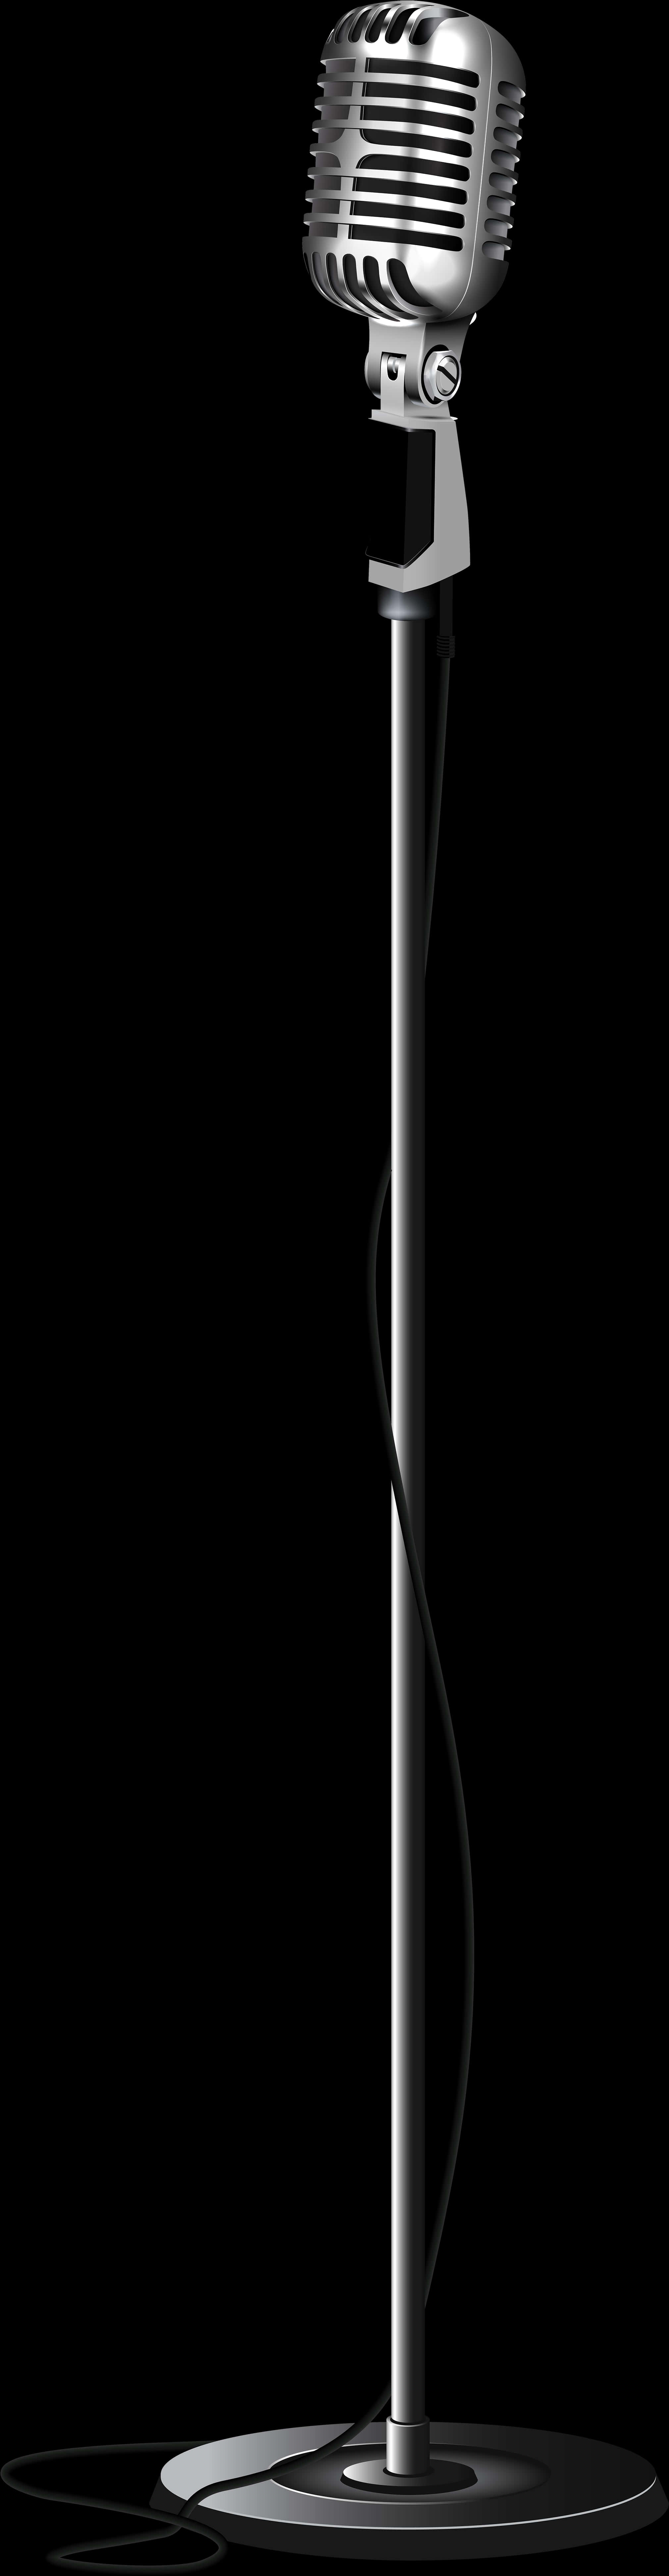 A Black And White Image Of A Pole